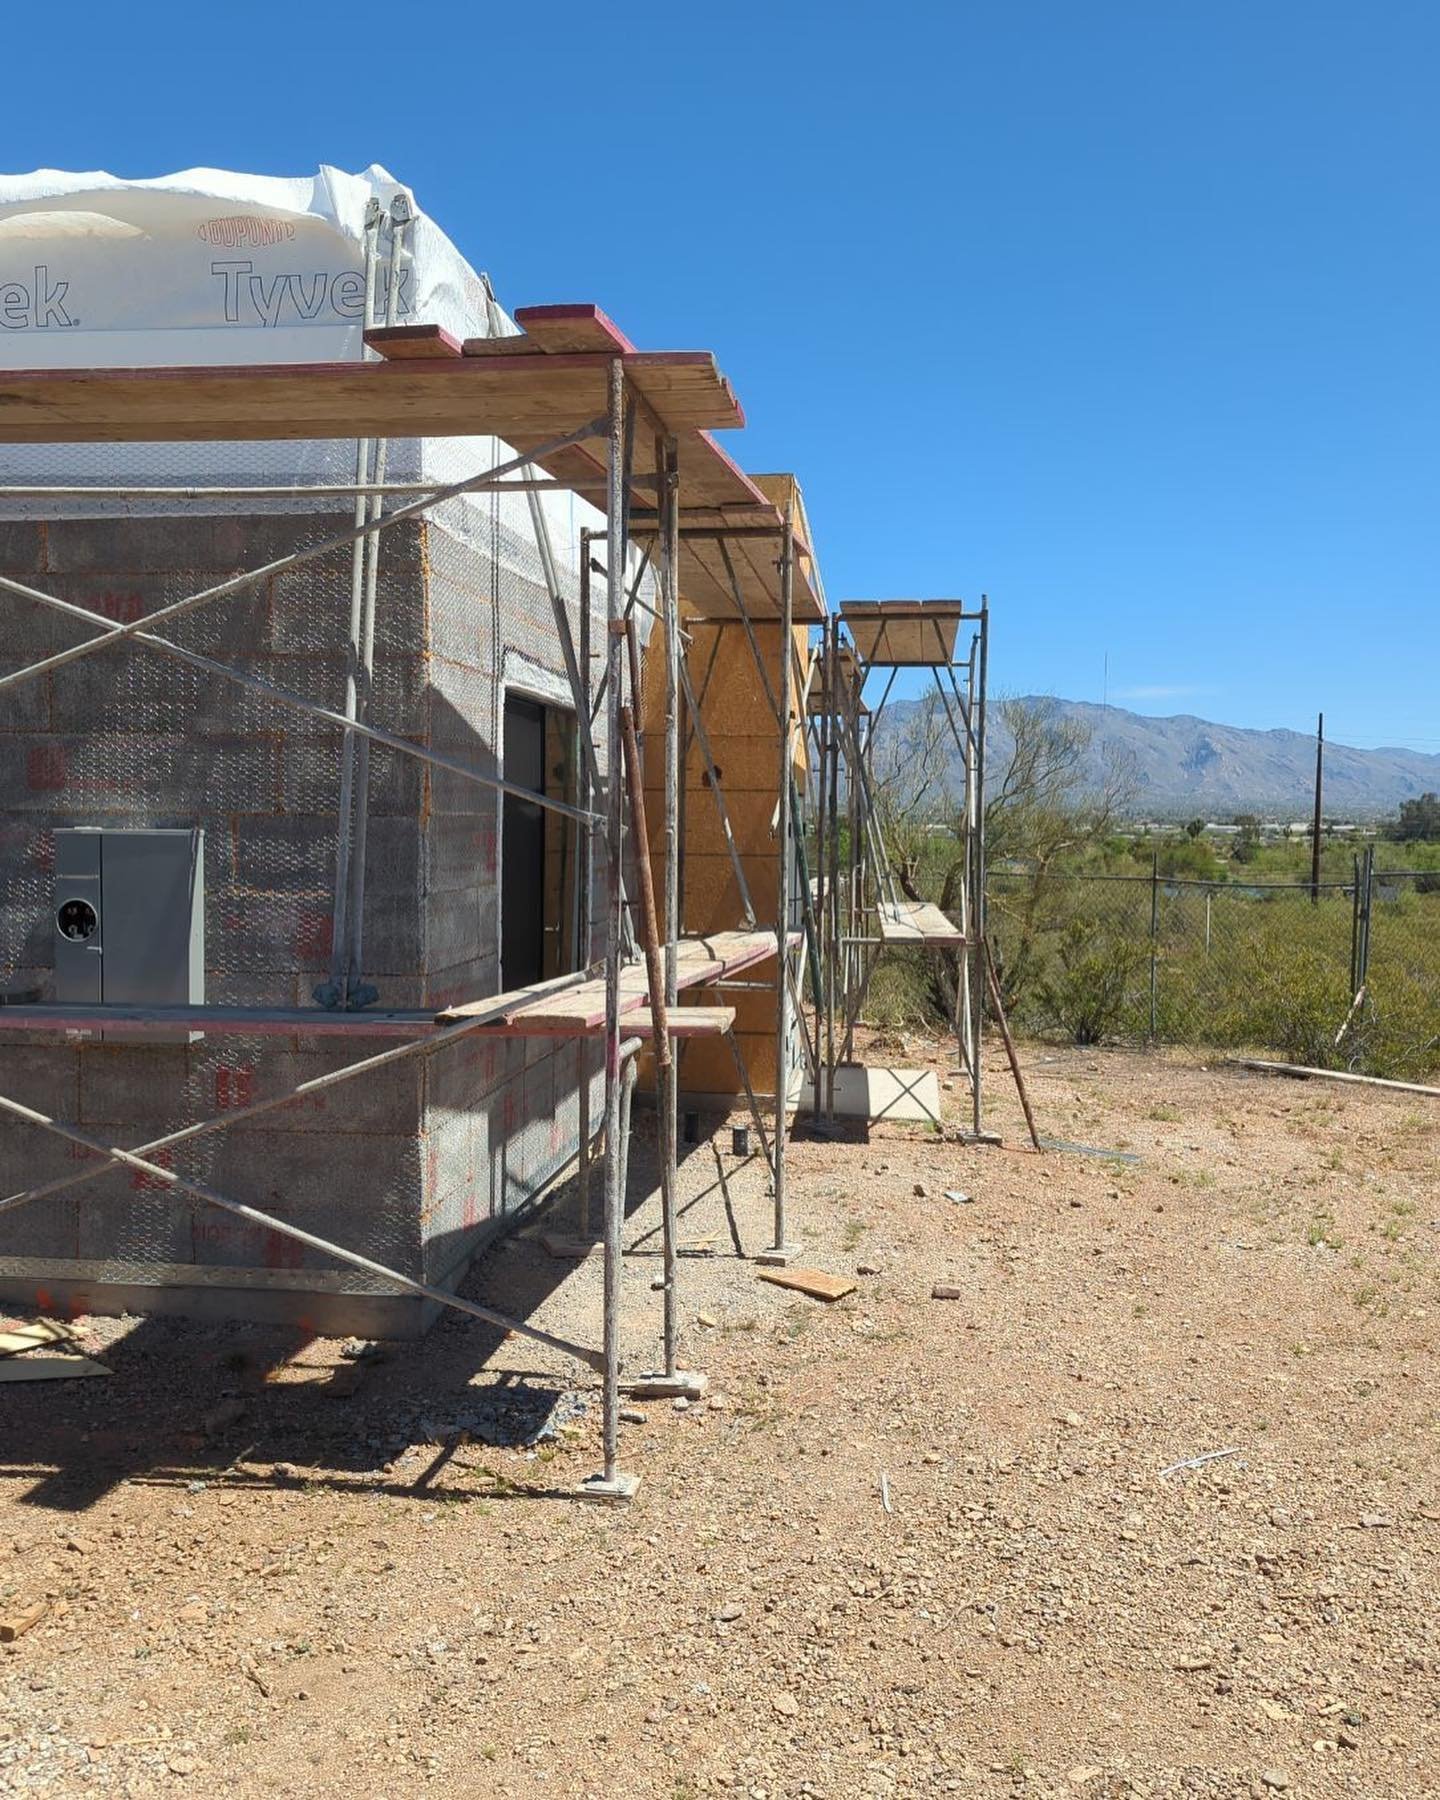 Join us for an exclusive peek into our current project&rsquo;s job site. Crafting elegance, one meticulous detail at a time 💪
.
.
.
#mccrearycustomhomes #customhomebuilder #arizonahomes #tucsoncontractor #contractorlife